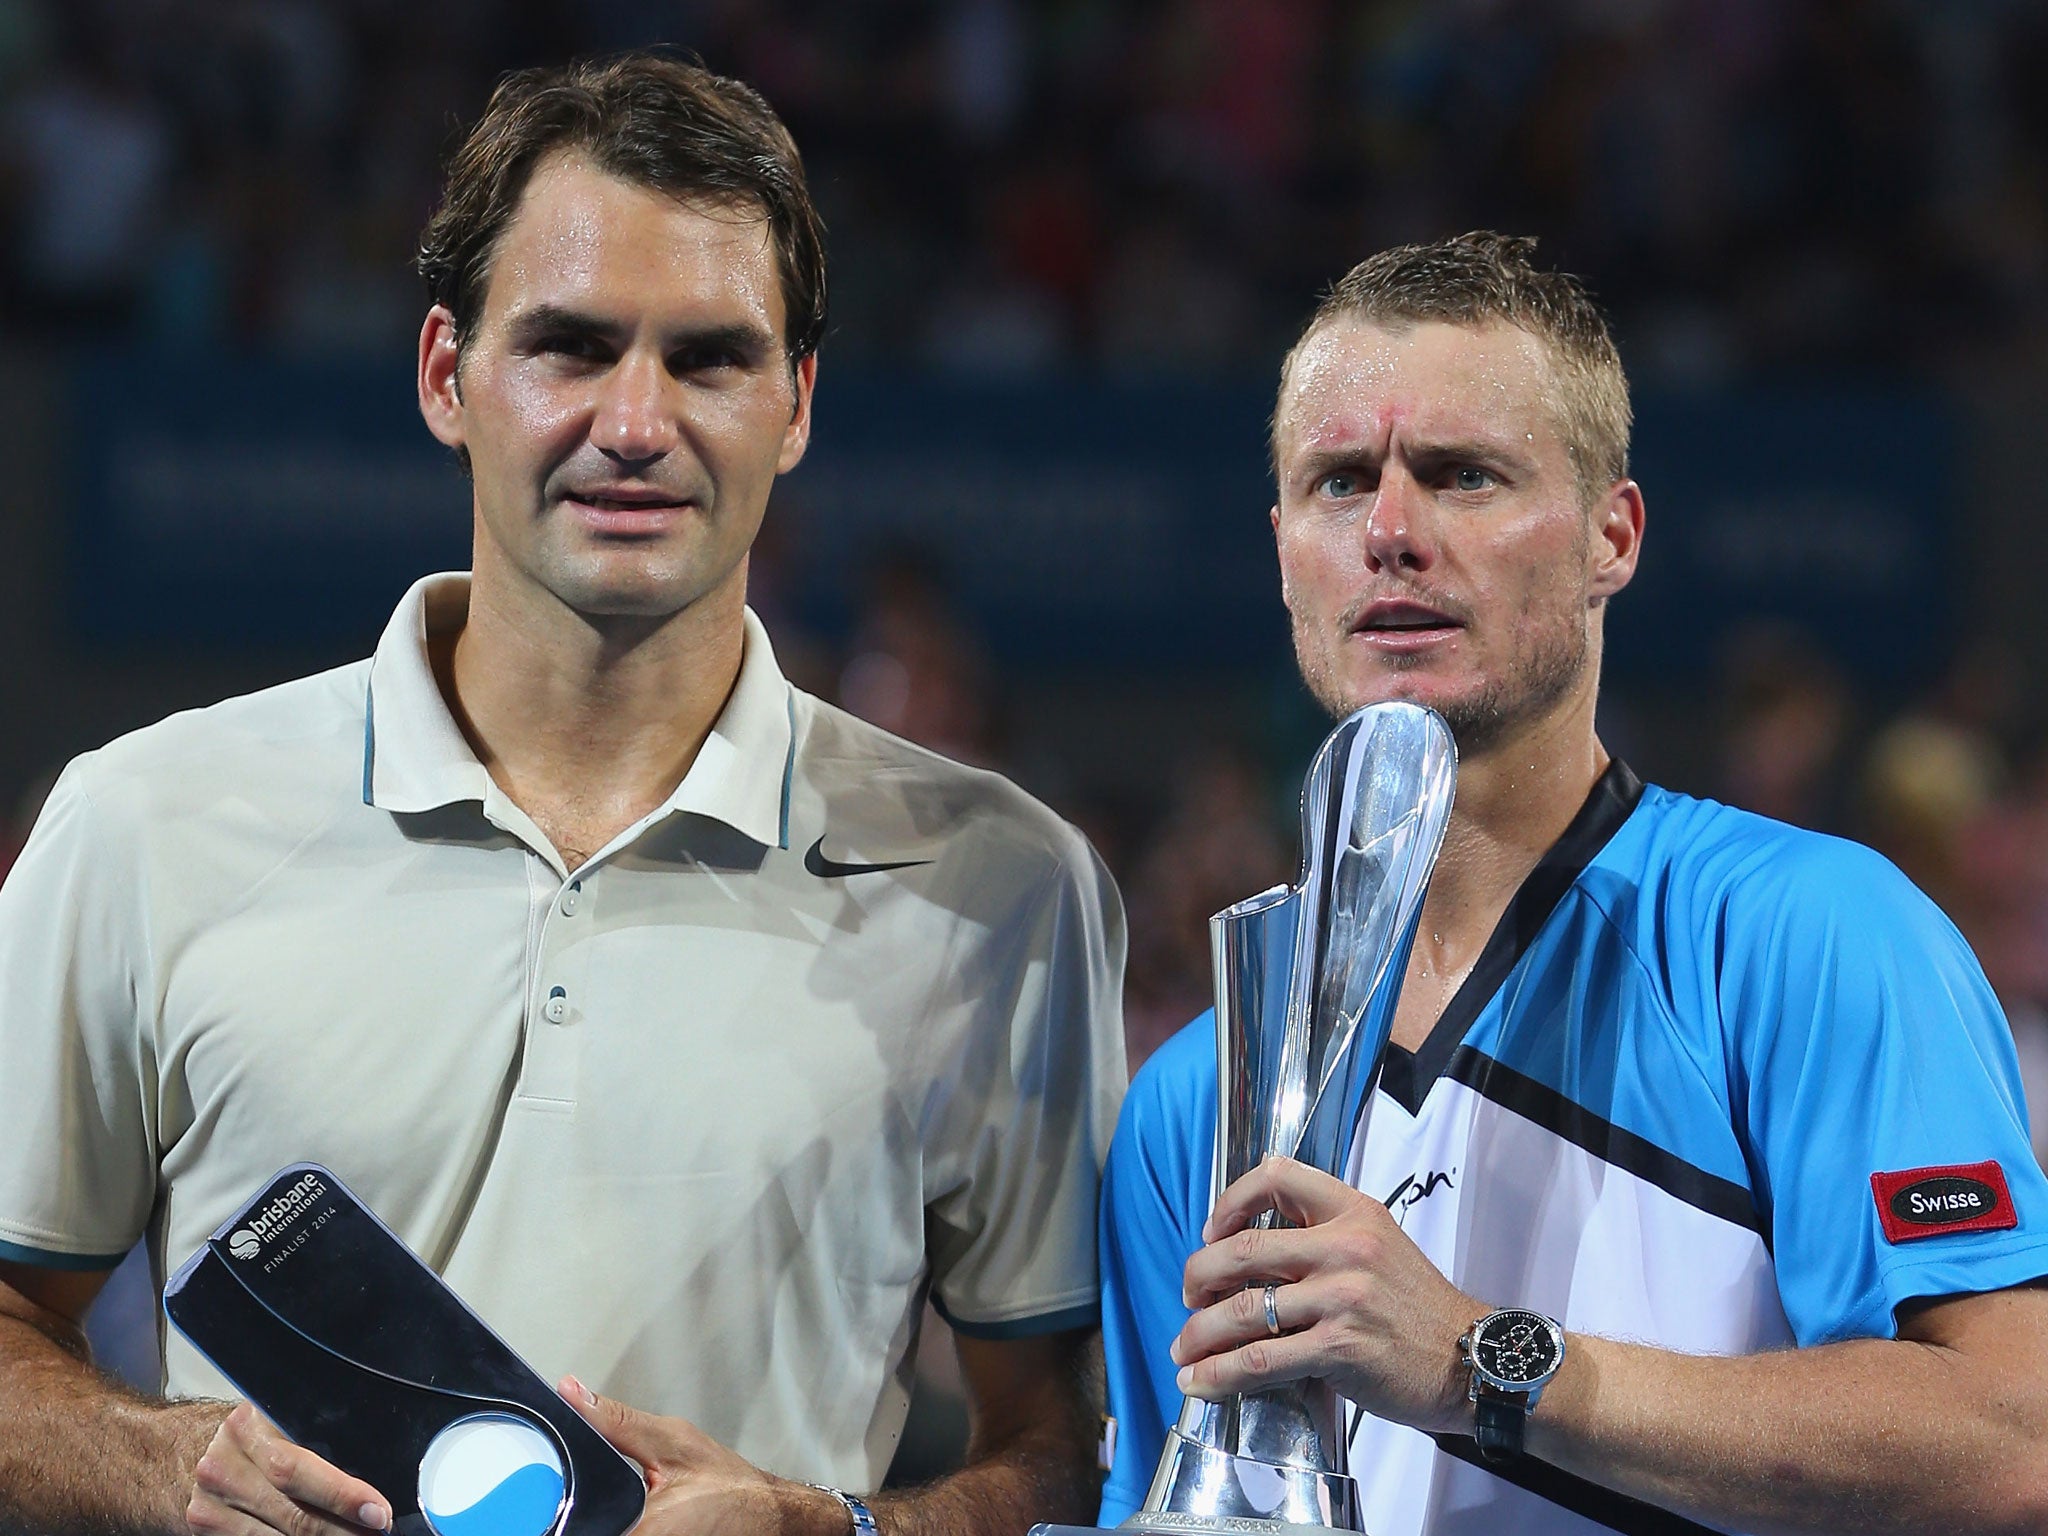 Lleyton Hewitt (right) holds the winners trophy while Roger Federer holds the runner up prize in Brisbane